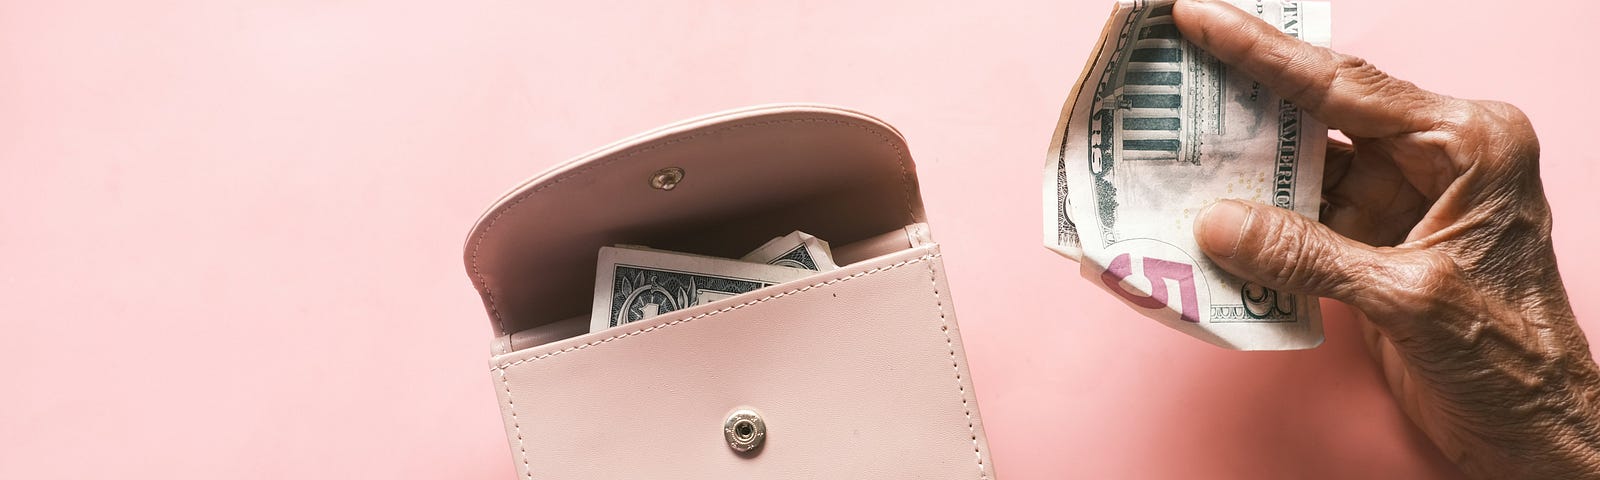 Pink back. The hands of an older person holding a pink leather coin purse. The left hand holds the purse with one dollar partially showing with the right hand getting ready to put $5 in the coin purse.